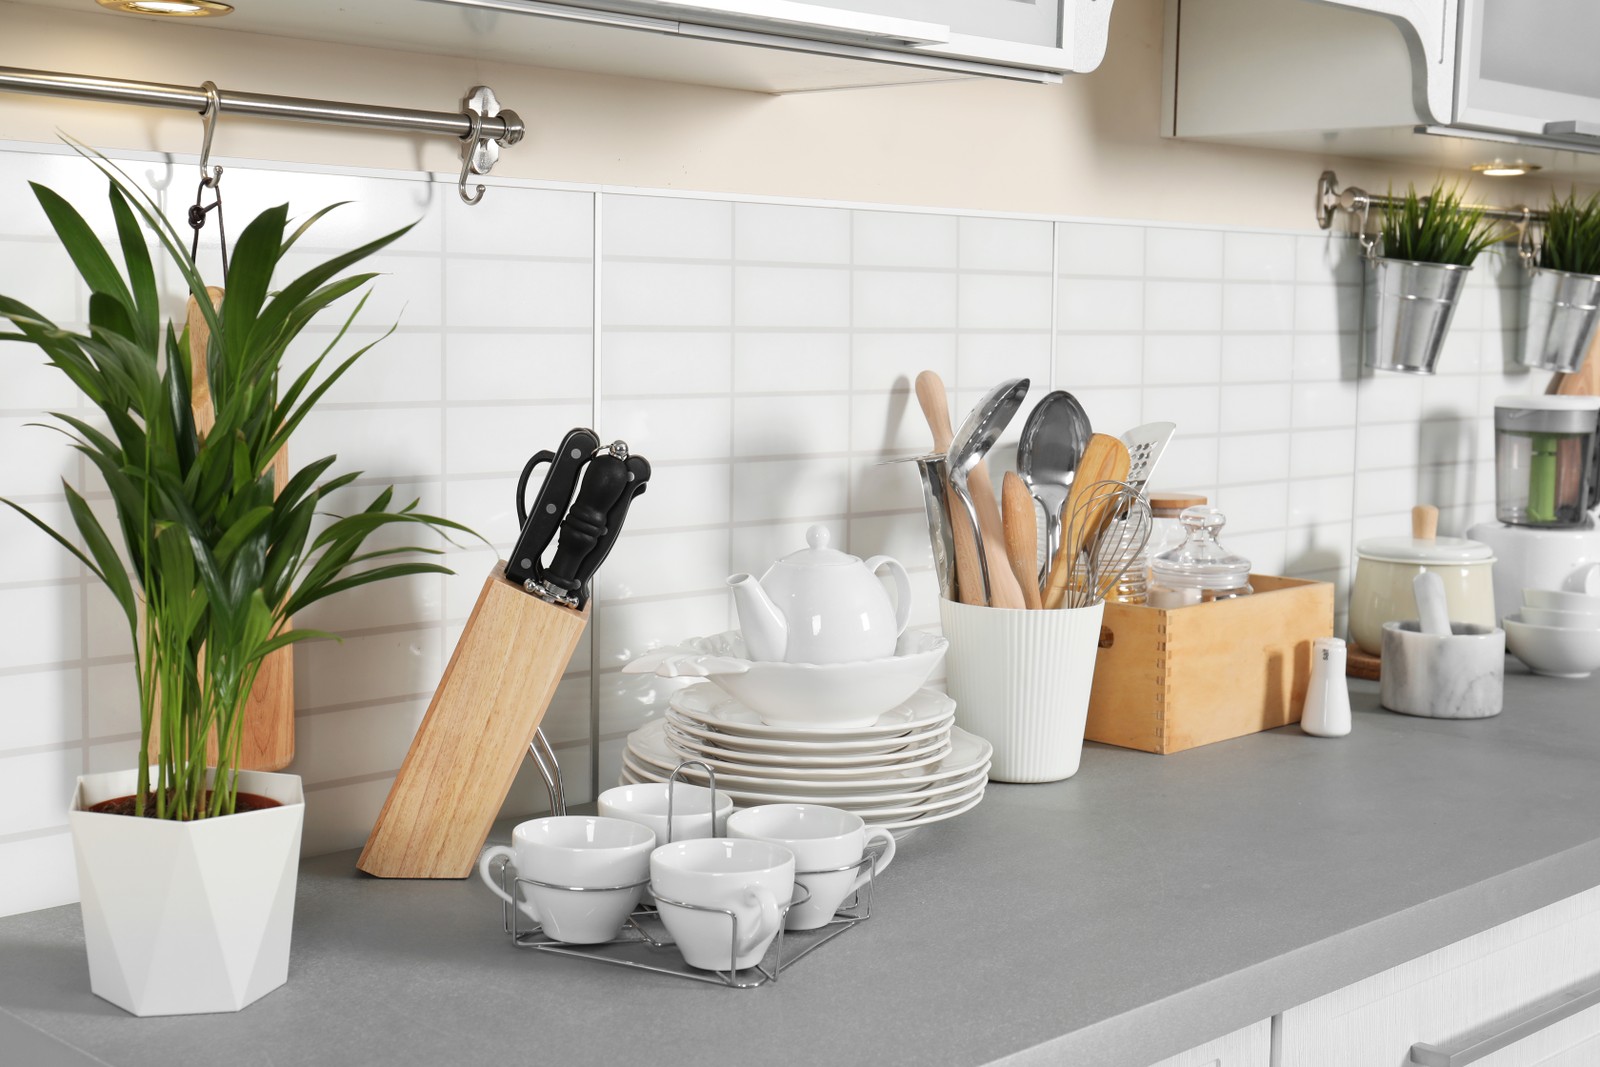 Photo of clean dishes and utensils on kitchen counter